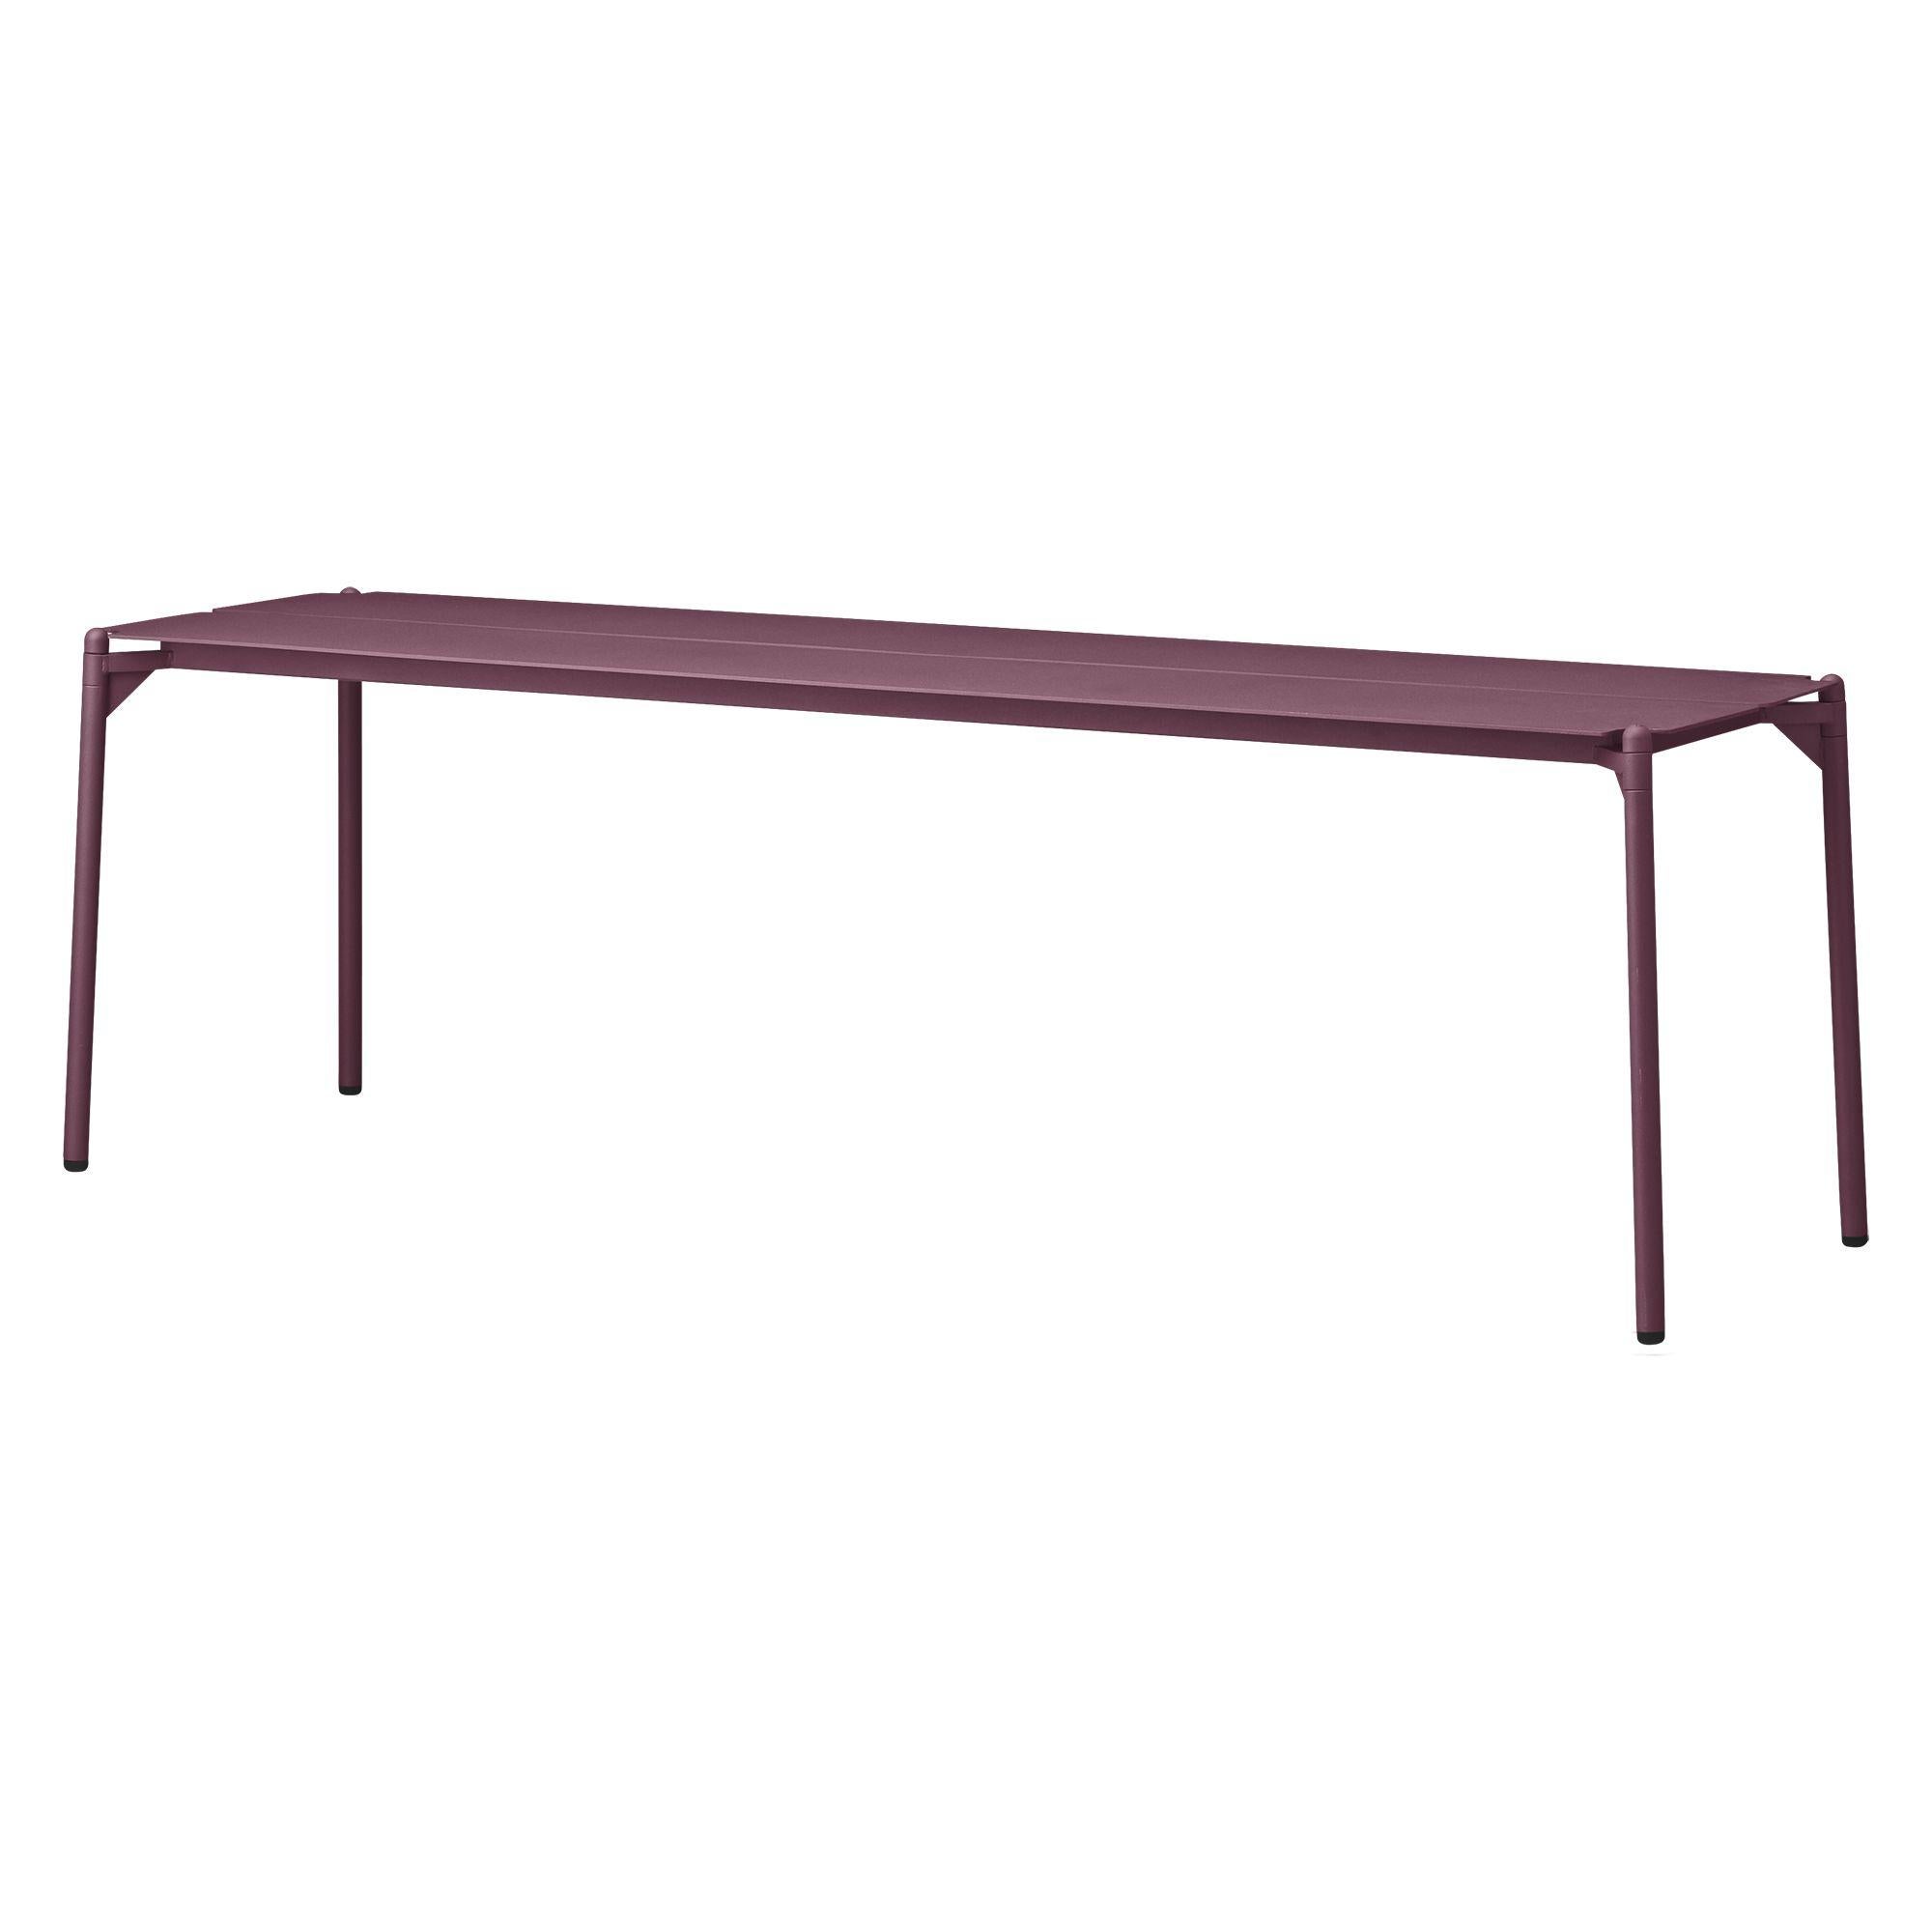 Bordeaux Minimalist bench
Dimensions: D 145 x W 43.3 x H 45.5 cm 
Materials: Steel w. Matte powder coating & aluminum w. Matte powder coating.
Available in colors: Taupe, bordeaux, forest, ginger bread, black and, black and gold.

With NOVO